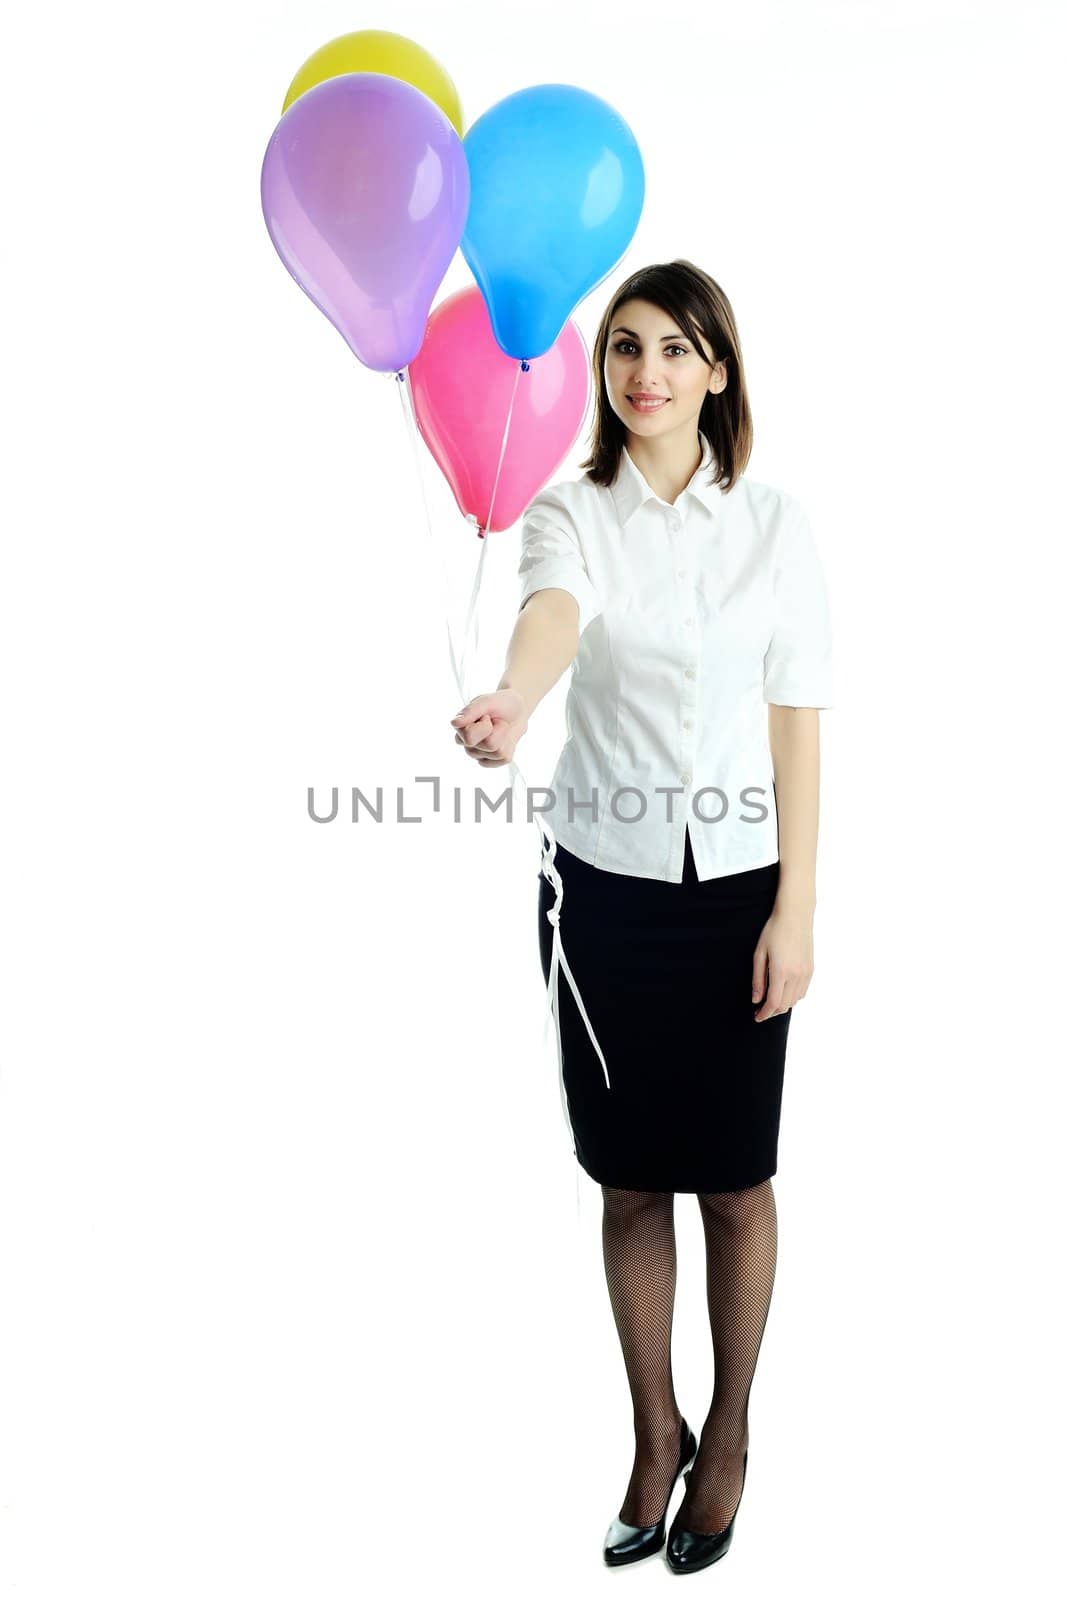 An image of a young woman with balloons